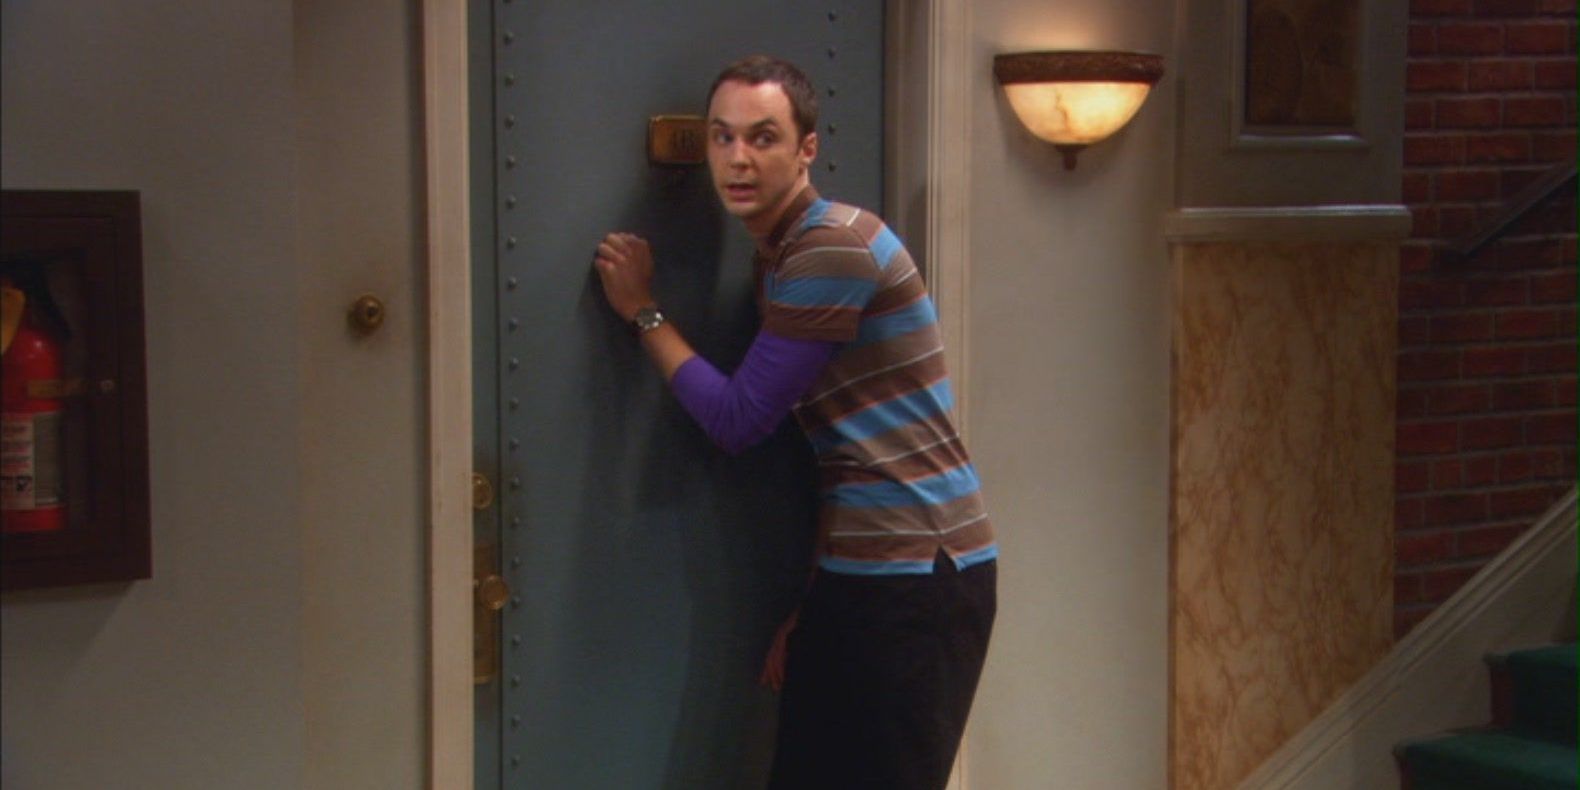 Sheldon knocking on Penny's door in The Big Bang Theory